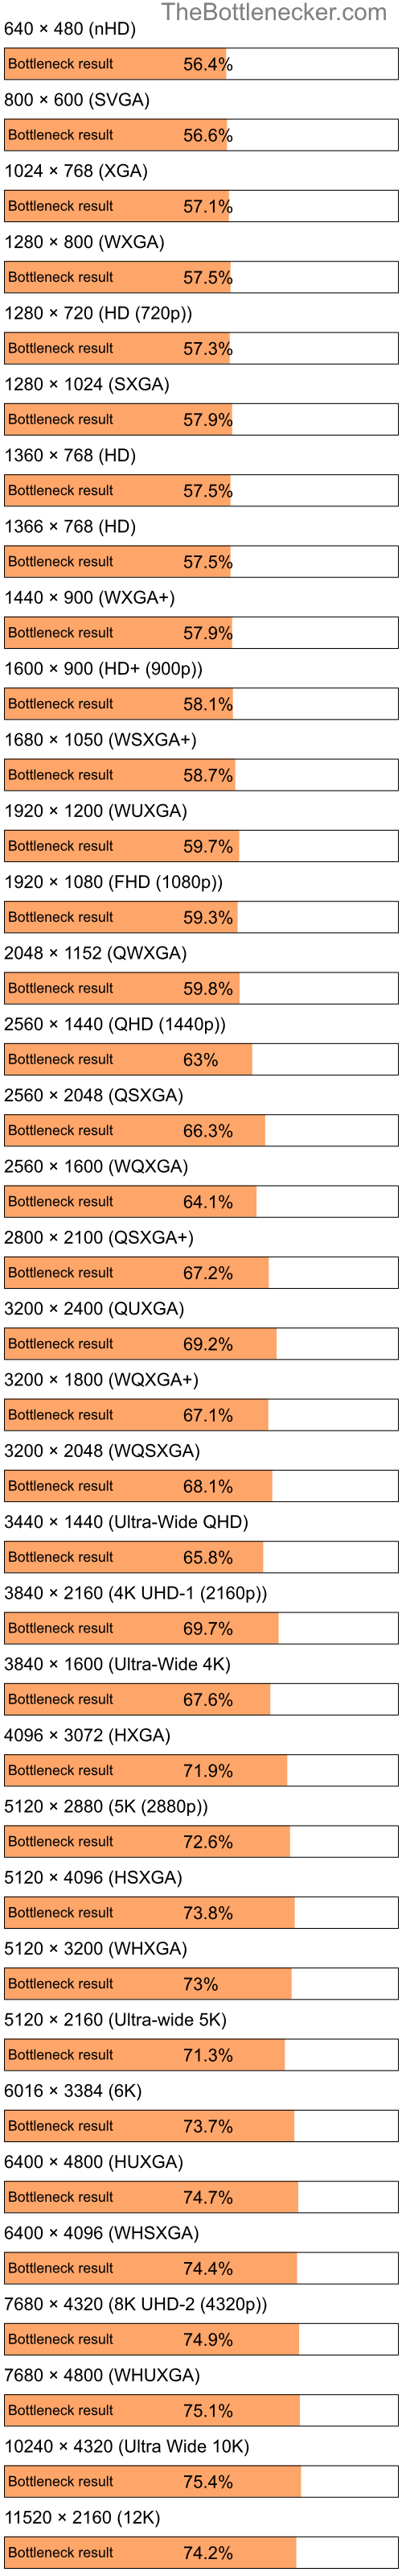 Bottleneck results by resolution for Intel Pentium 4 and AMD Mobility Radeon HD 4200 in Processor Intense Tasks